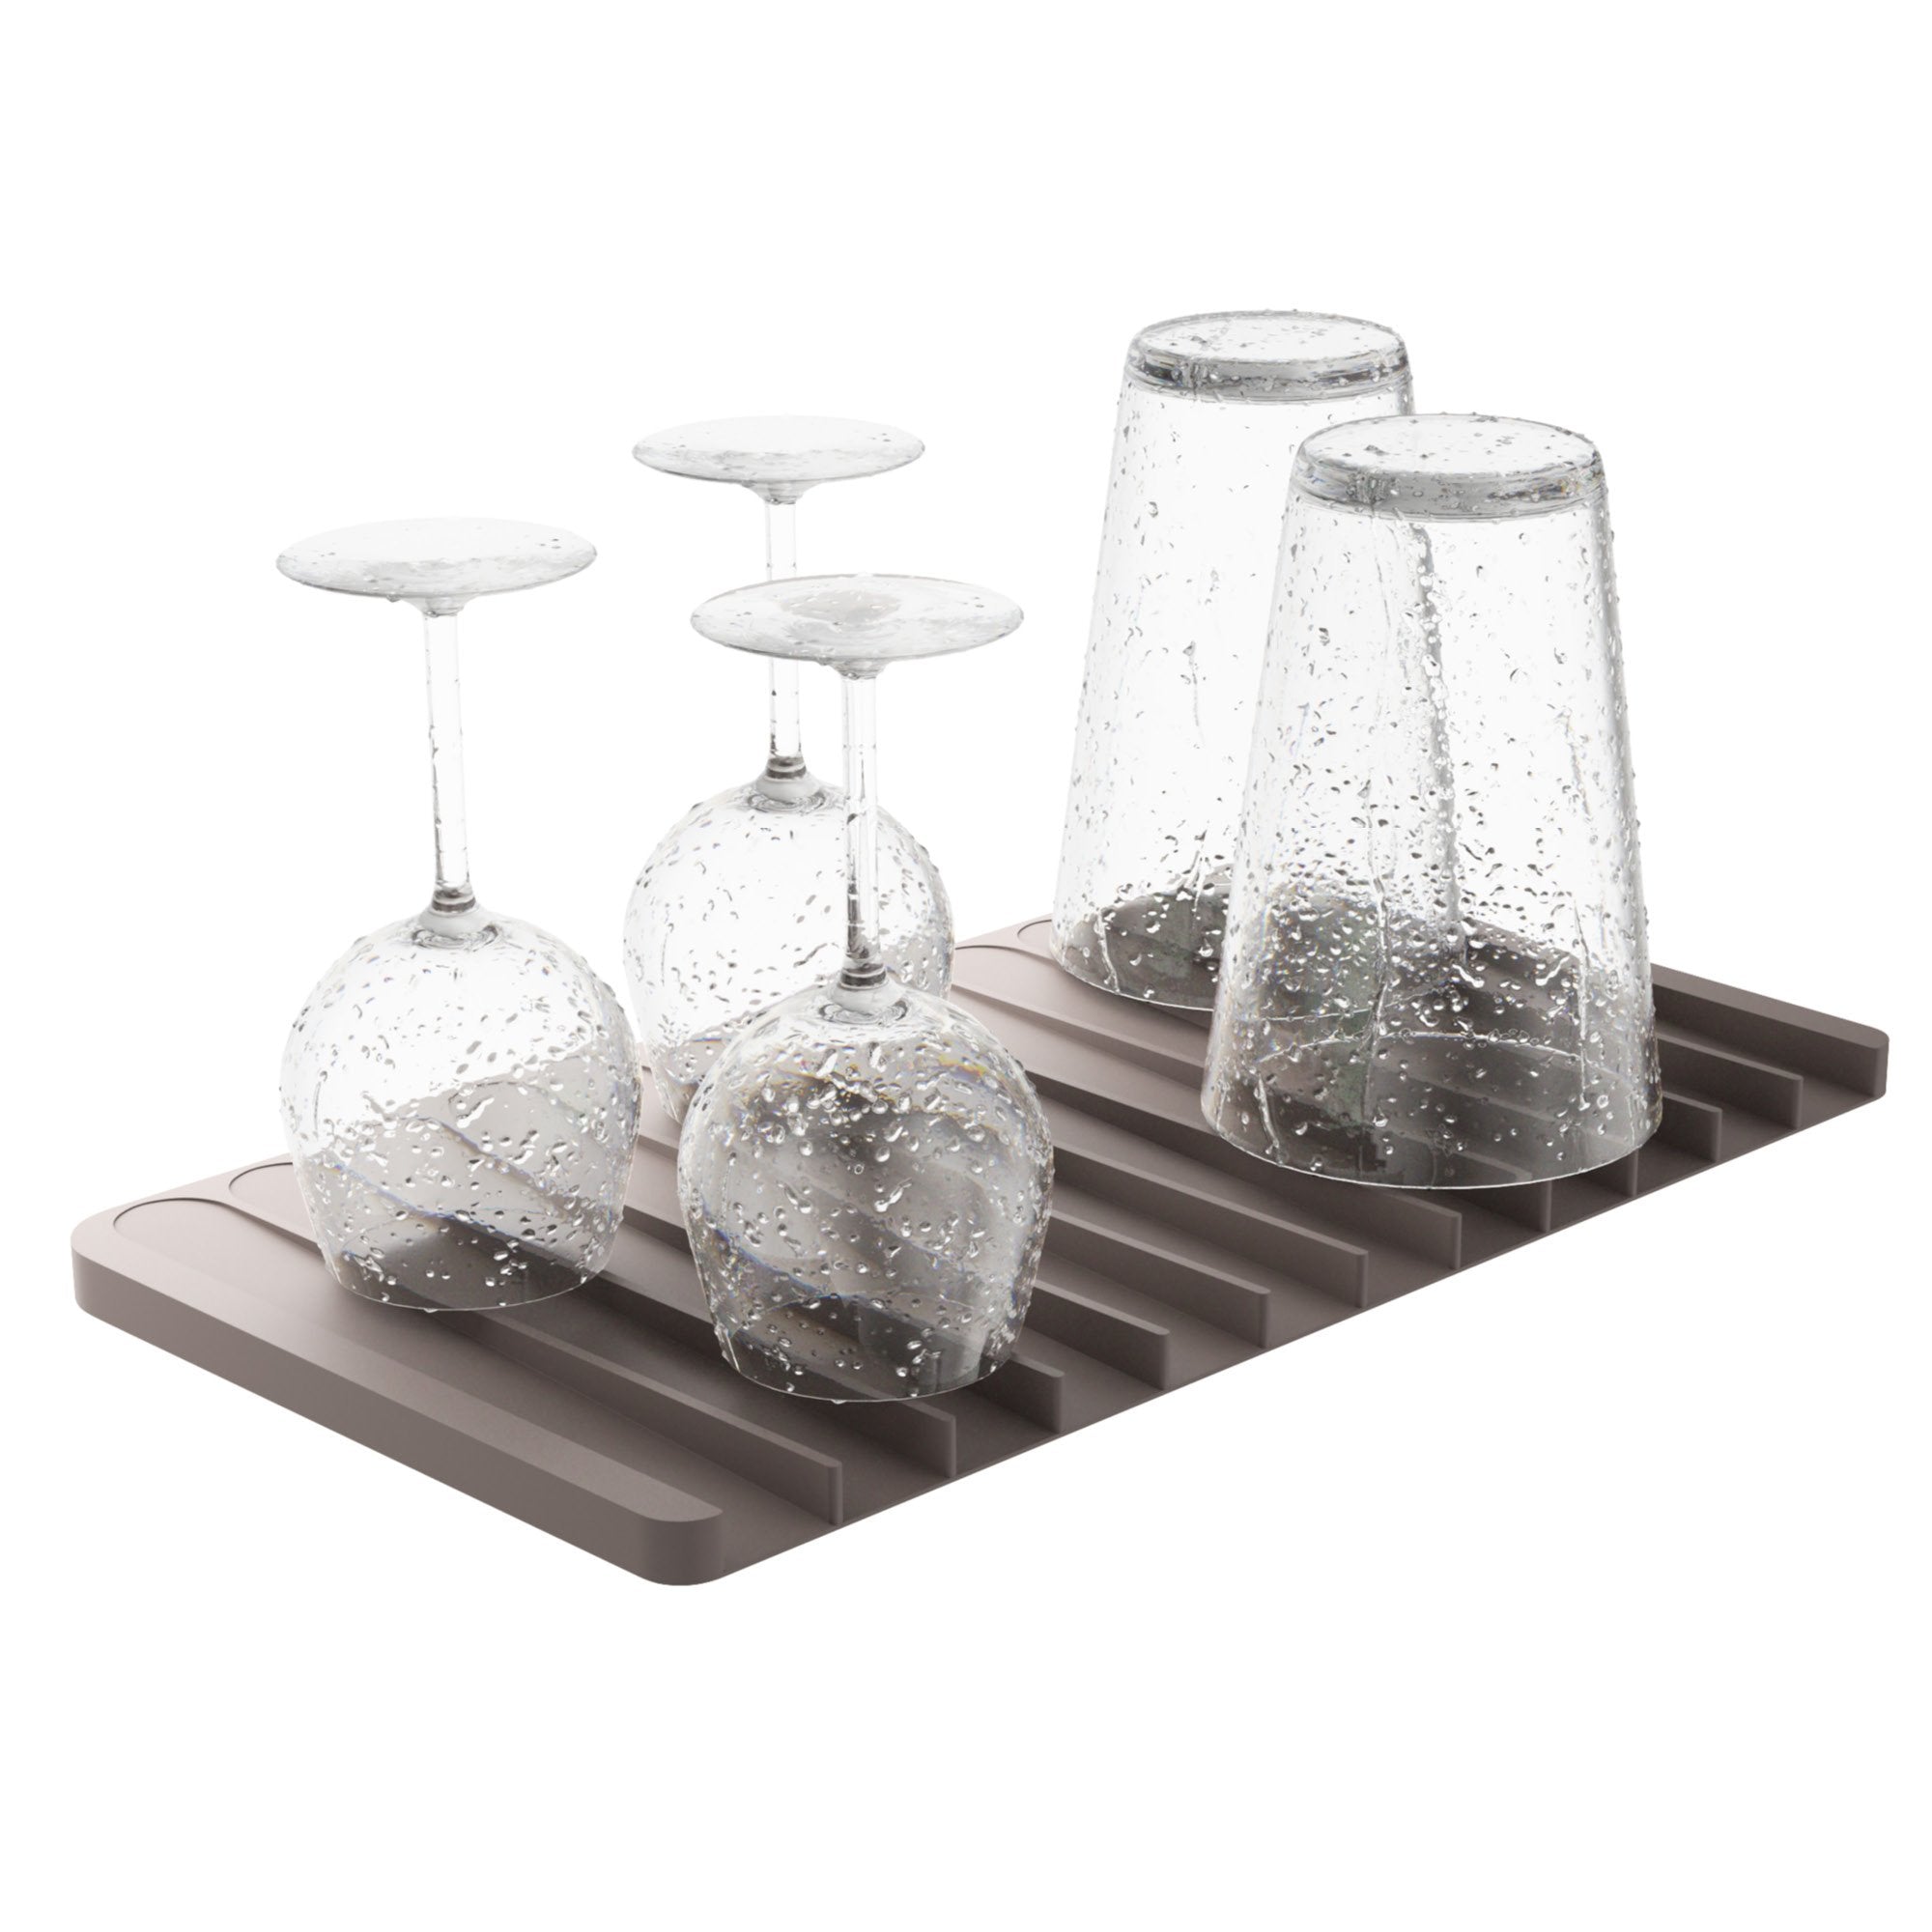 Epicureanist Silicone Stemware Drying Mat, 2 Mats - Bed Bath & Beyond -  12486021